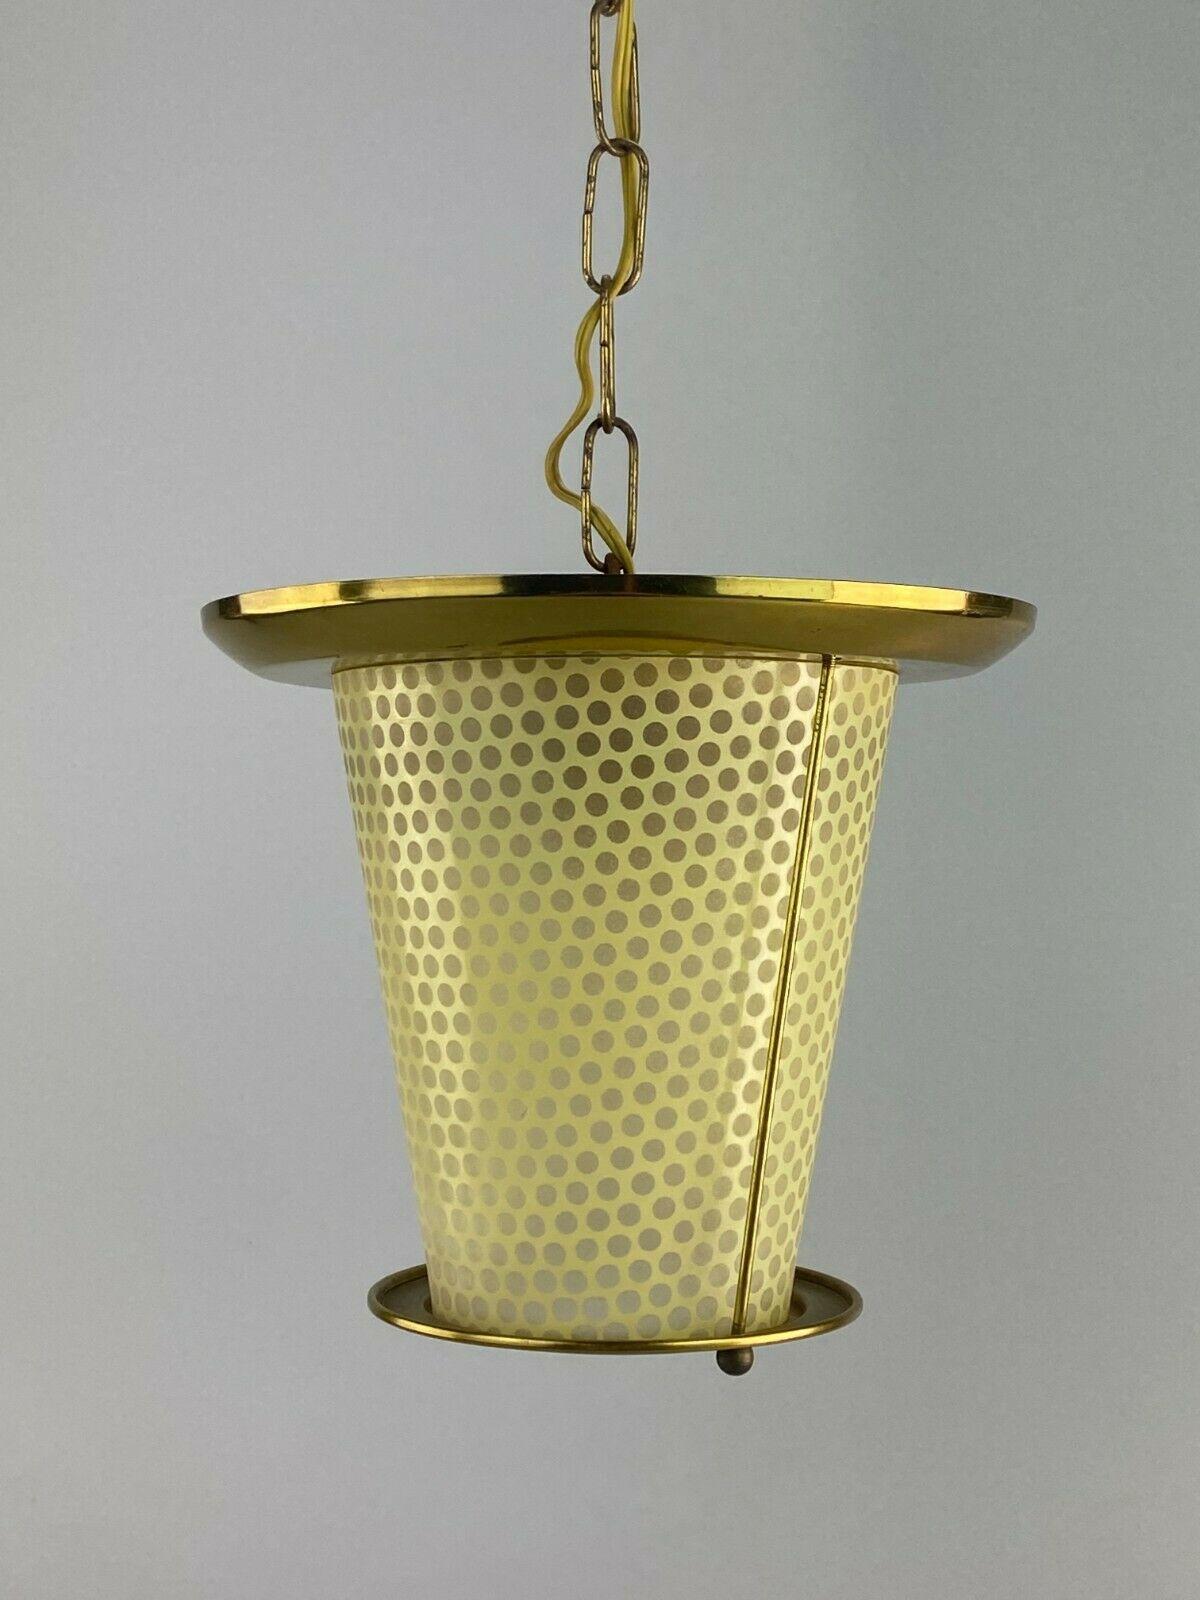 50s 60s lamp light ceiling lamp Mid Century brass design 50s 60s

Object: ceiling lamp

Manufacturer:

Condition: good - vintage

Age: around 1950-1960

Dimensions:

Diameter = 18.5cm
Height = 19cm

Other notes:

The pictures serve